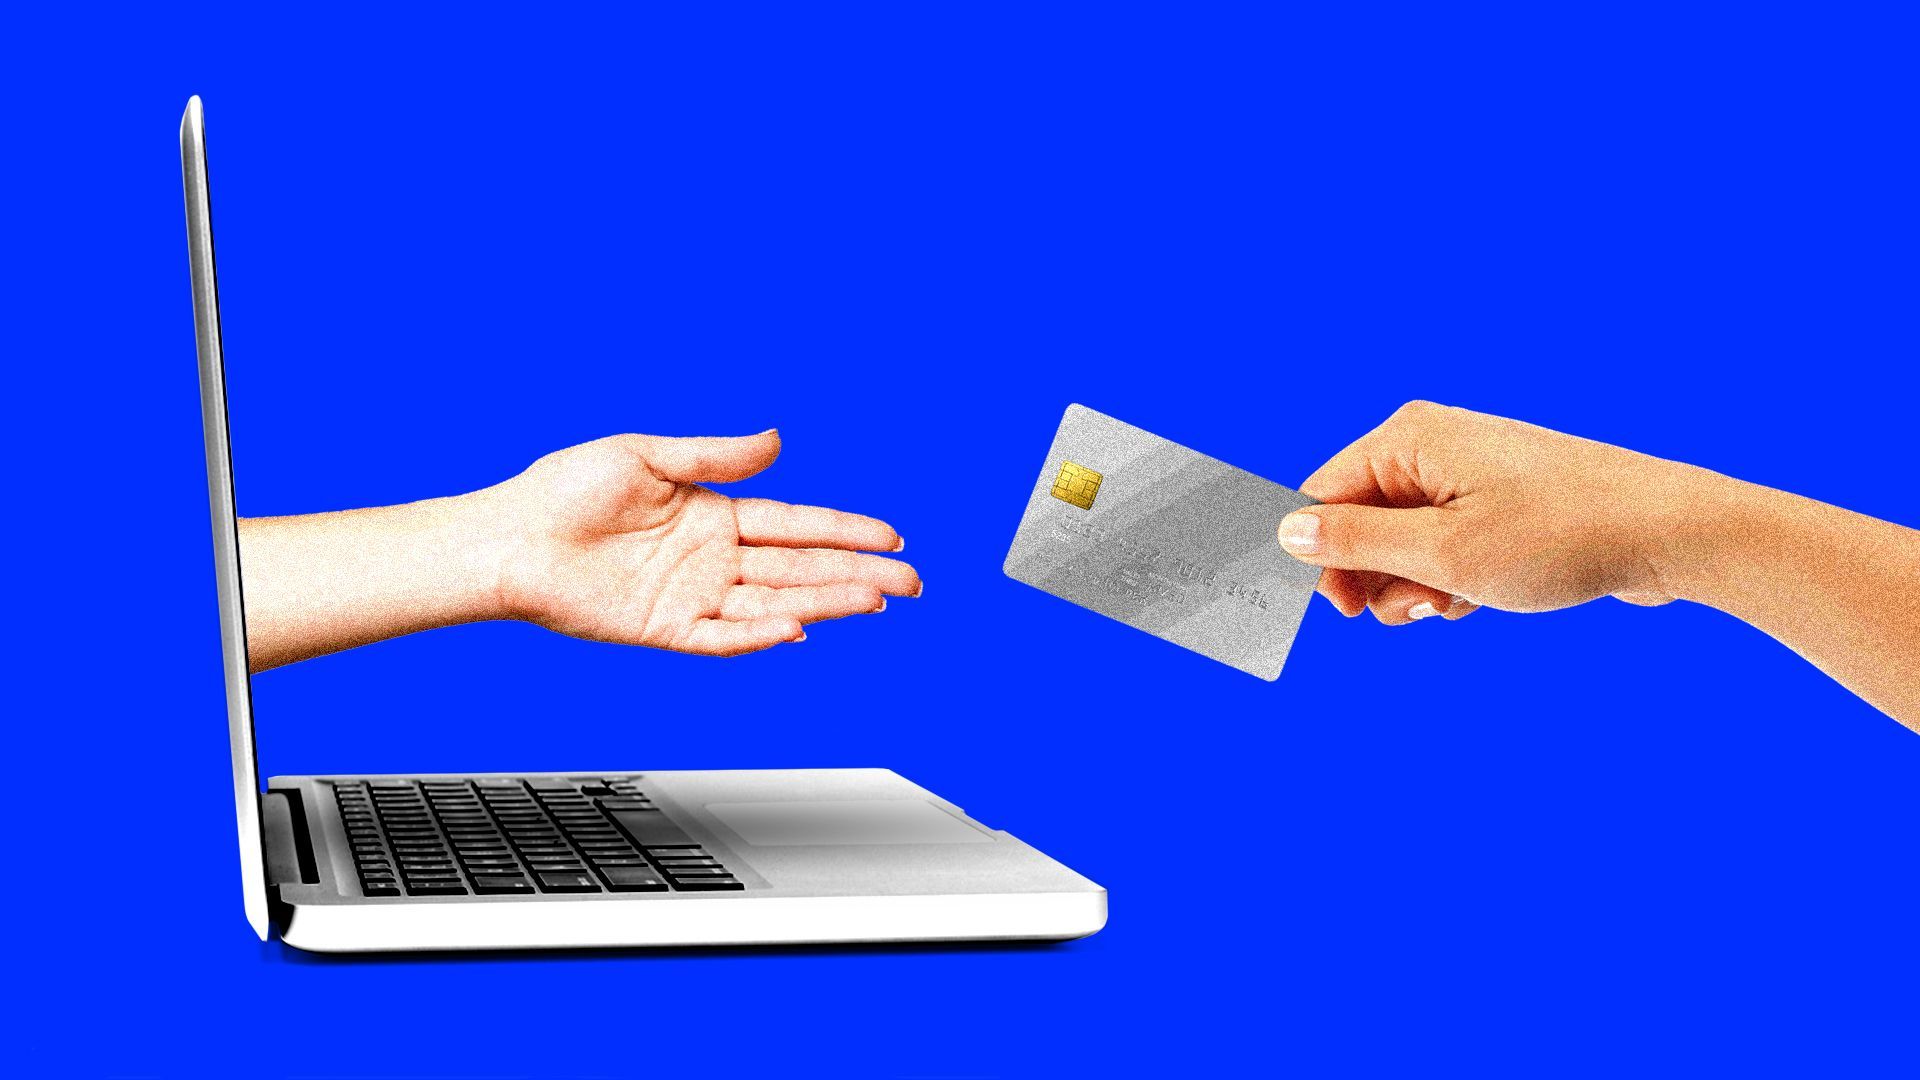 A hand extending from a laptop screen reaches for a credit card